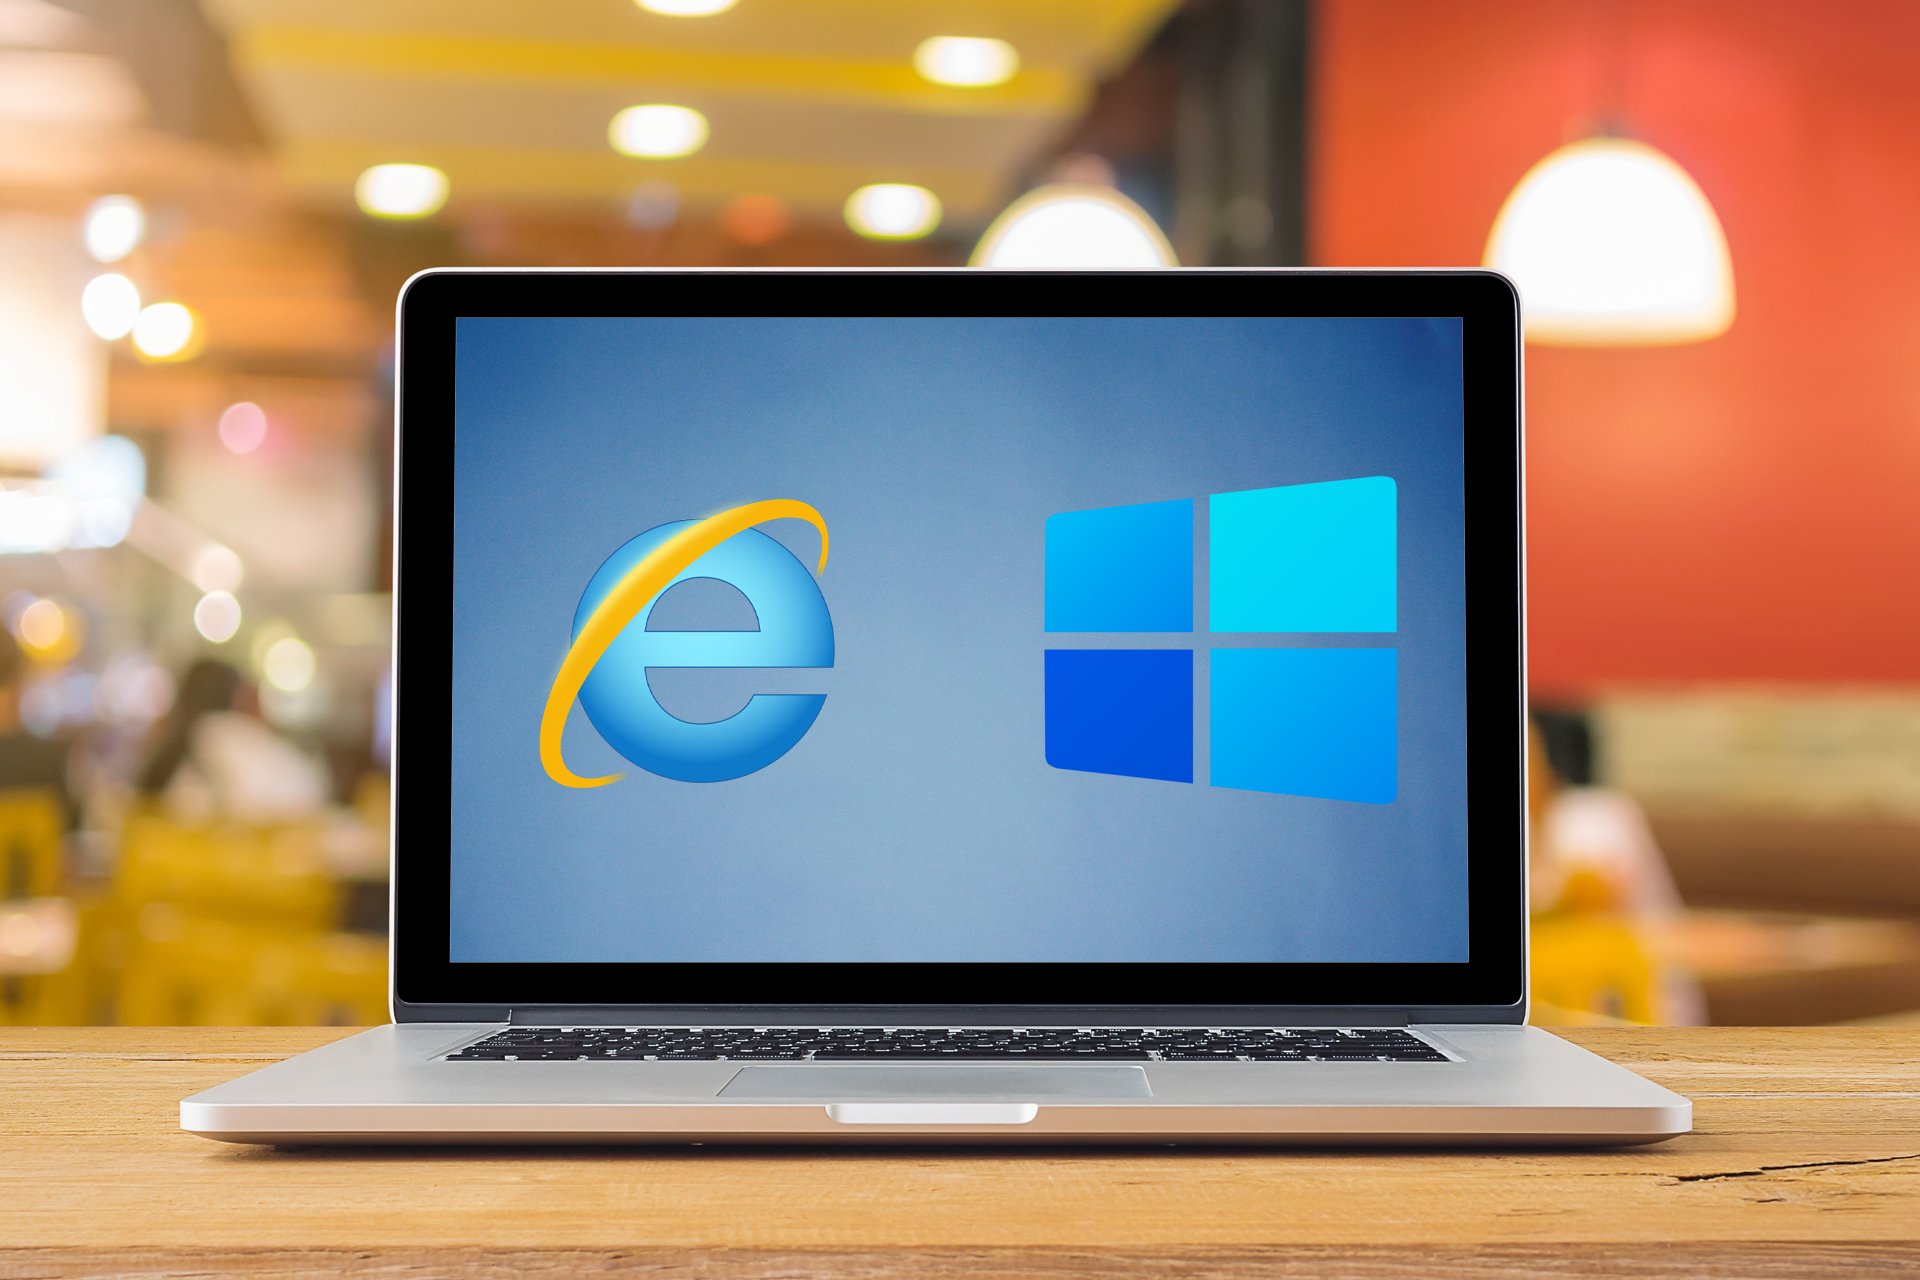 How to enable Internet Explorer on Windows 11